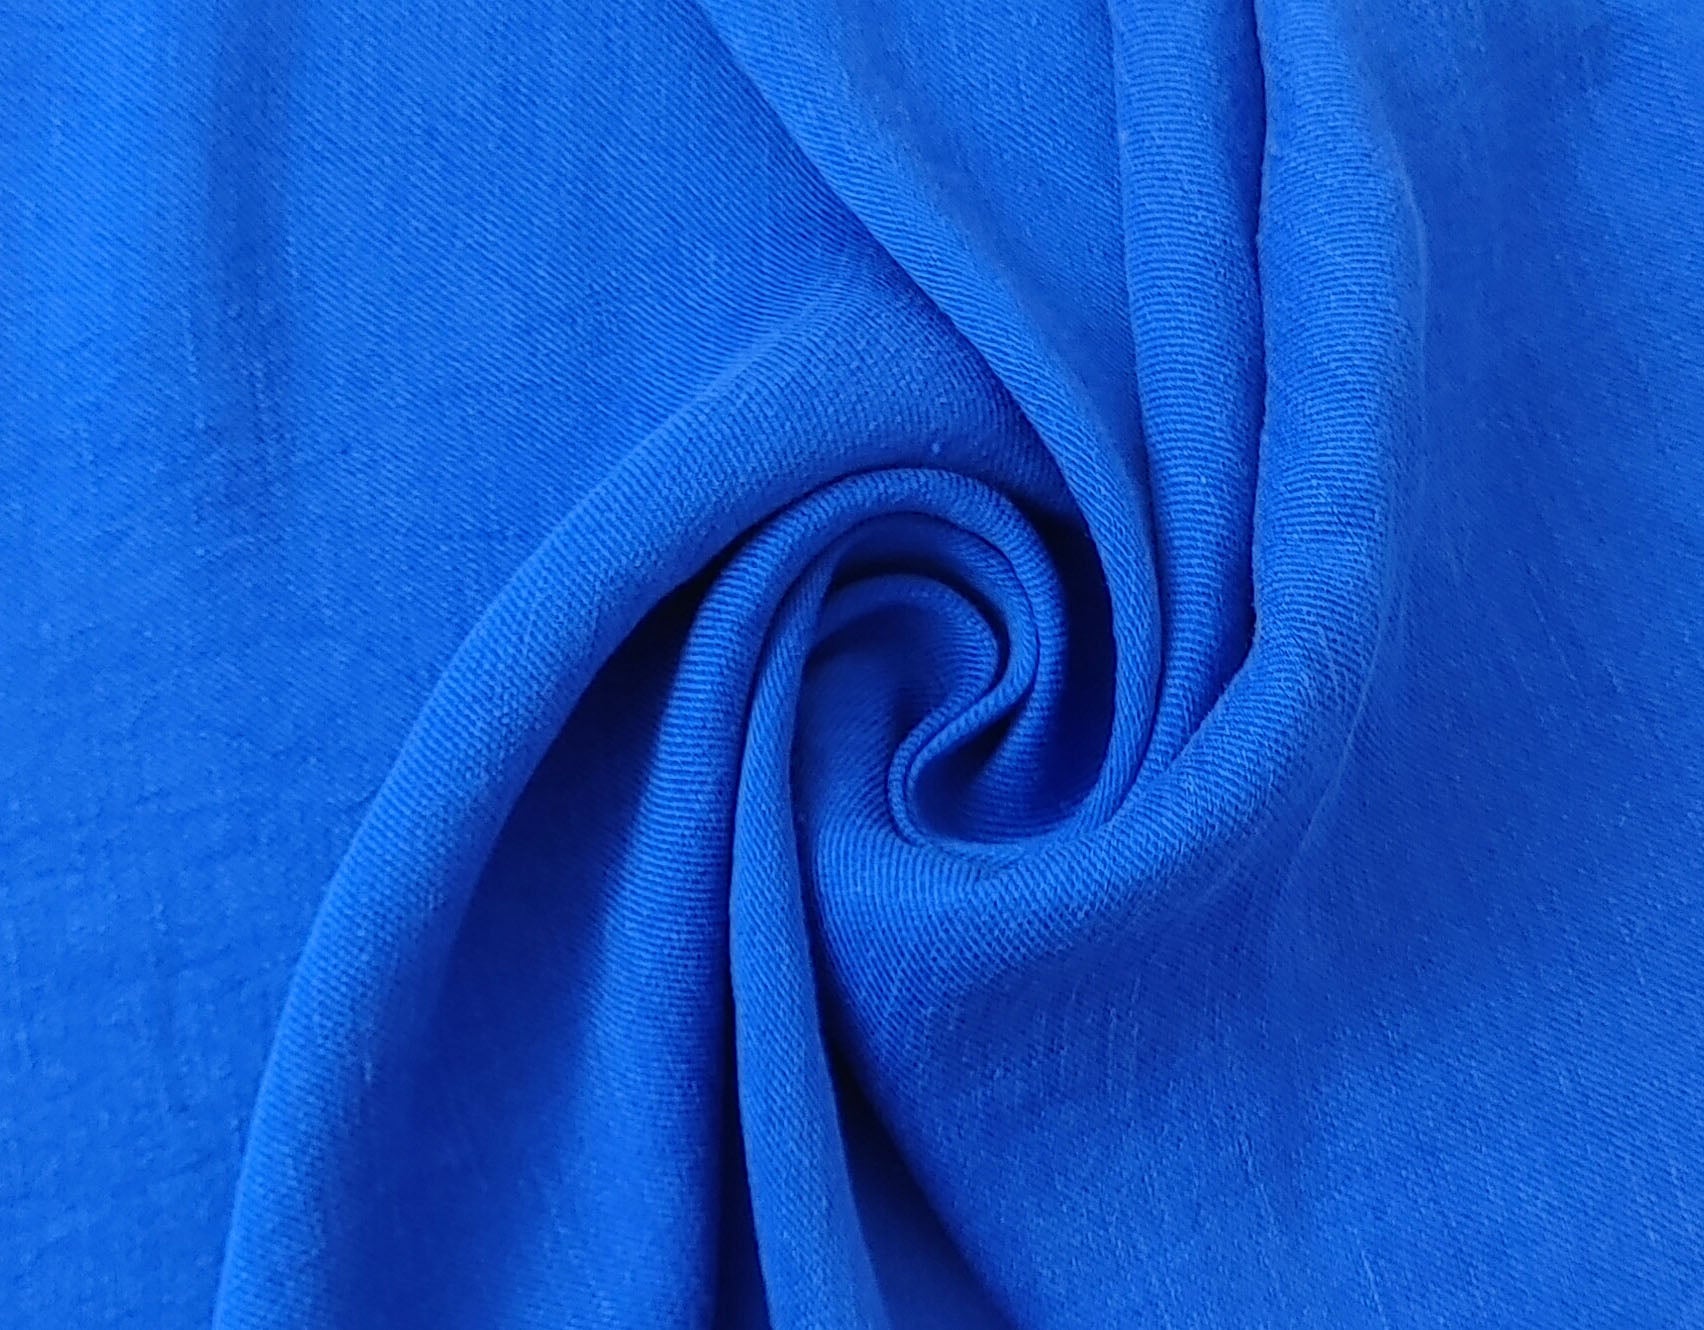 Elegance in Twill: Silky Linen Rayon Fabric with Good Drape 6032 6033 - The Linen Lab - Blue